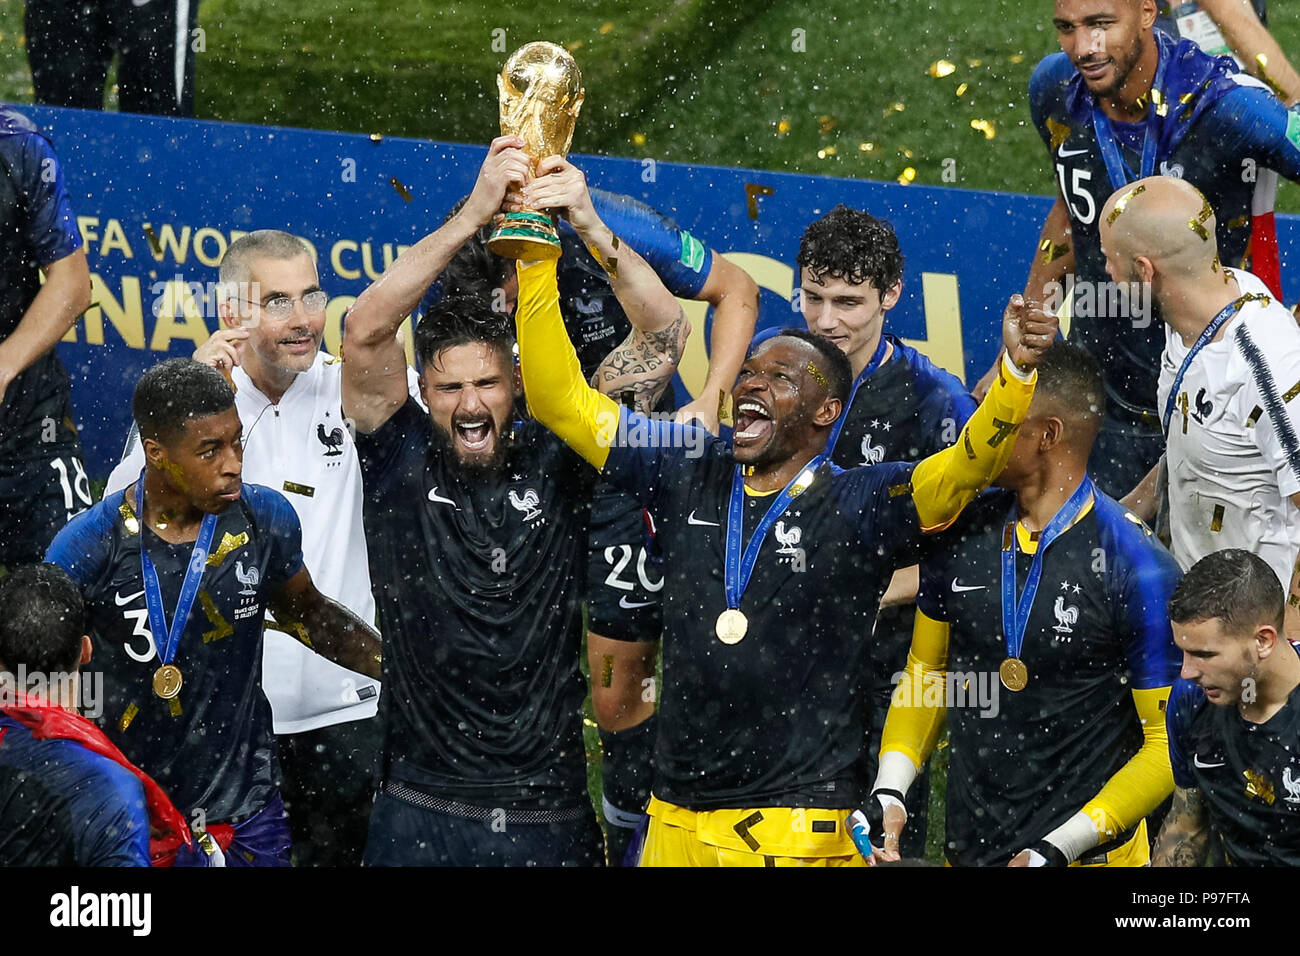 Moscow, Russia. 15th July 2018. Olivier Giroud of France and Steve Mandanda of France celebrate with the trophy after the 2018 FIFA World Cup Final match between France and Croatia at Luzhniki Stadium on July 15th 2018 in Moscow, Russia. (Photo by Daniel Chesterton/phcimages.com) Credit: PHC Images/Alamy Live News Stock Photo